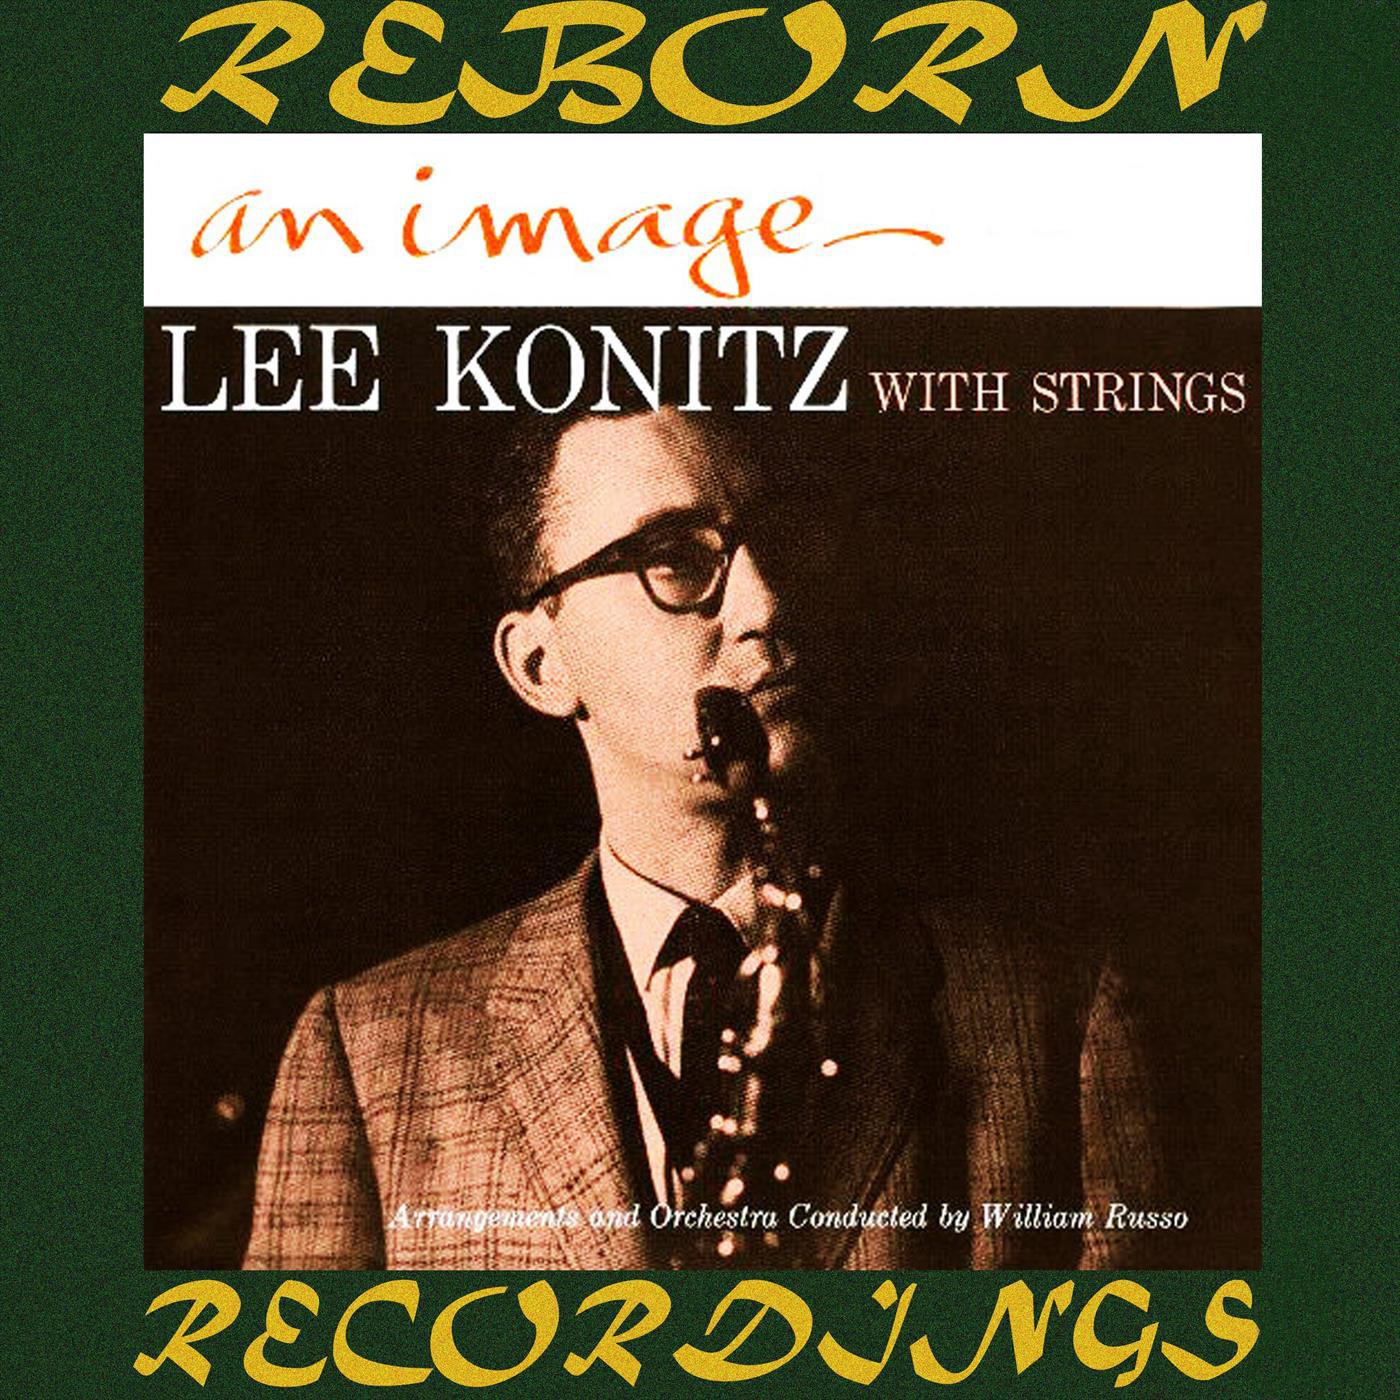 An Image Lee Konitz with Strings (HD Remastered)